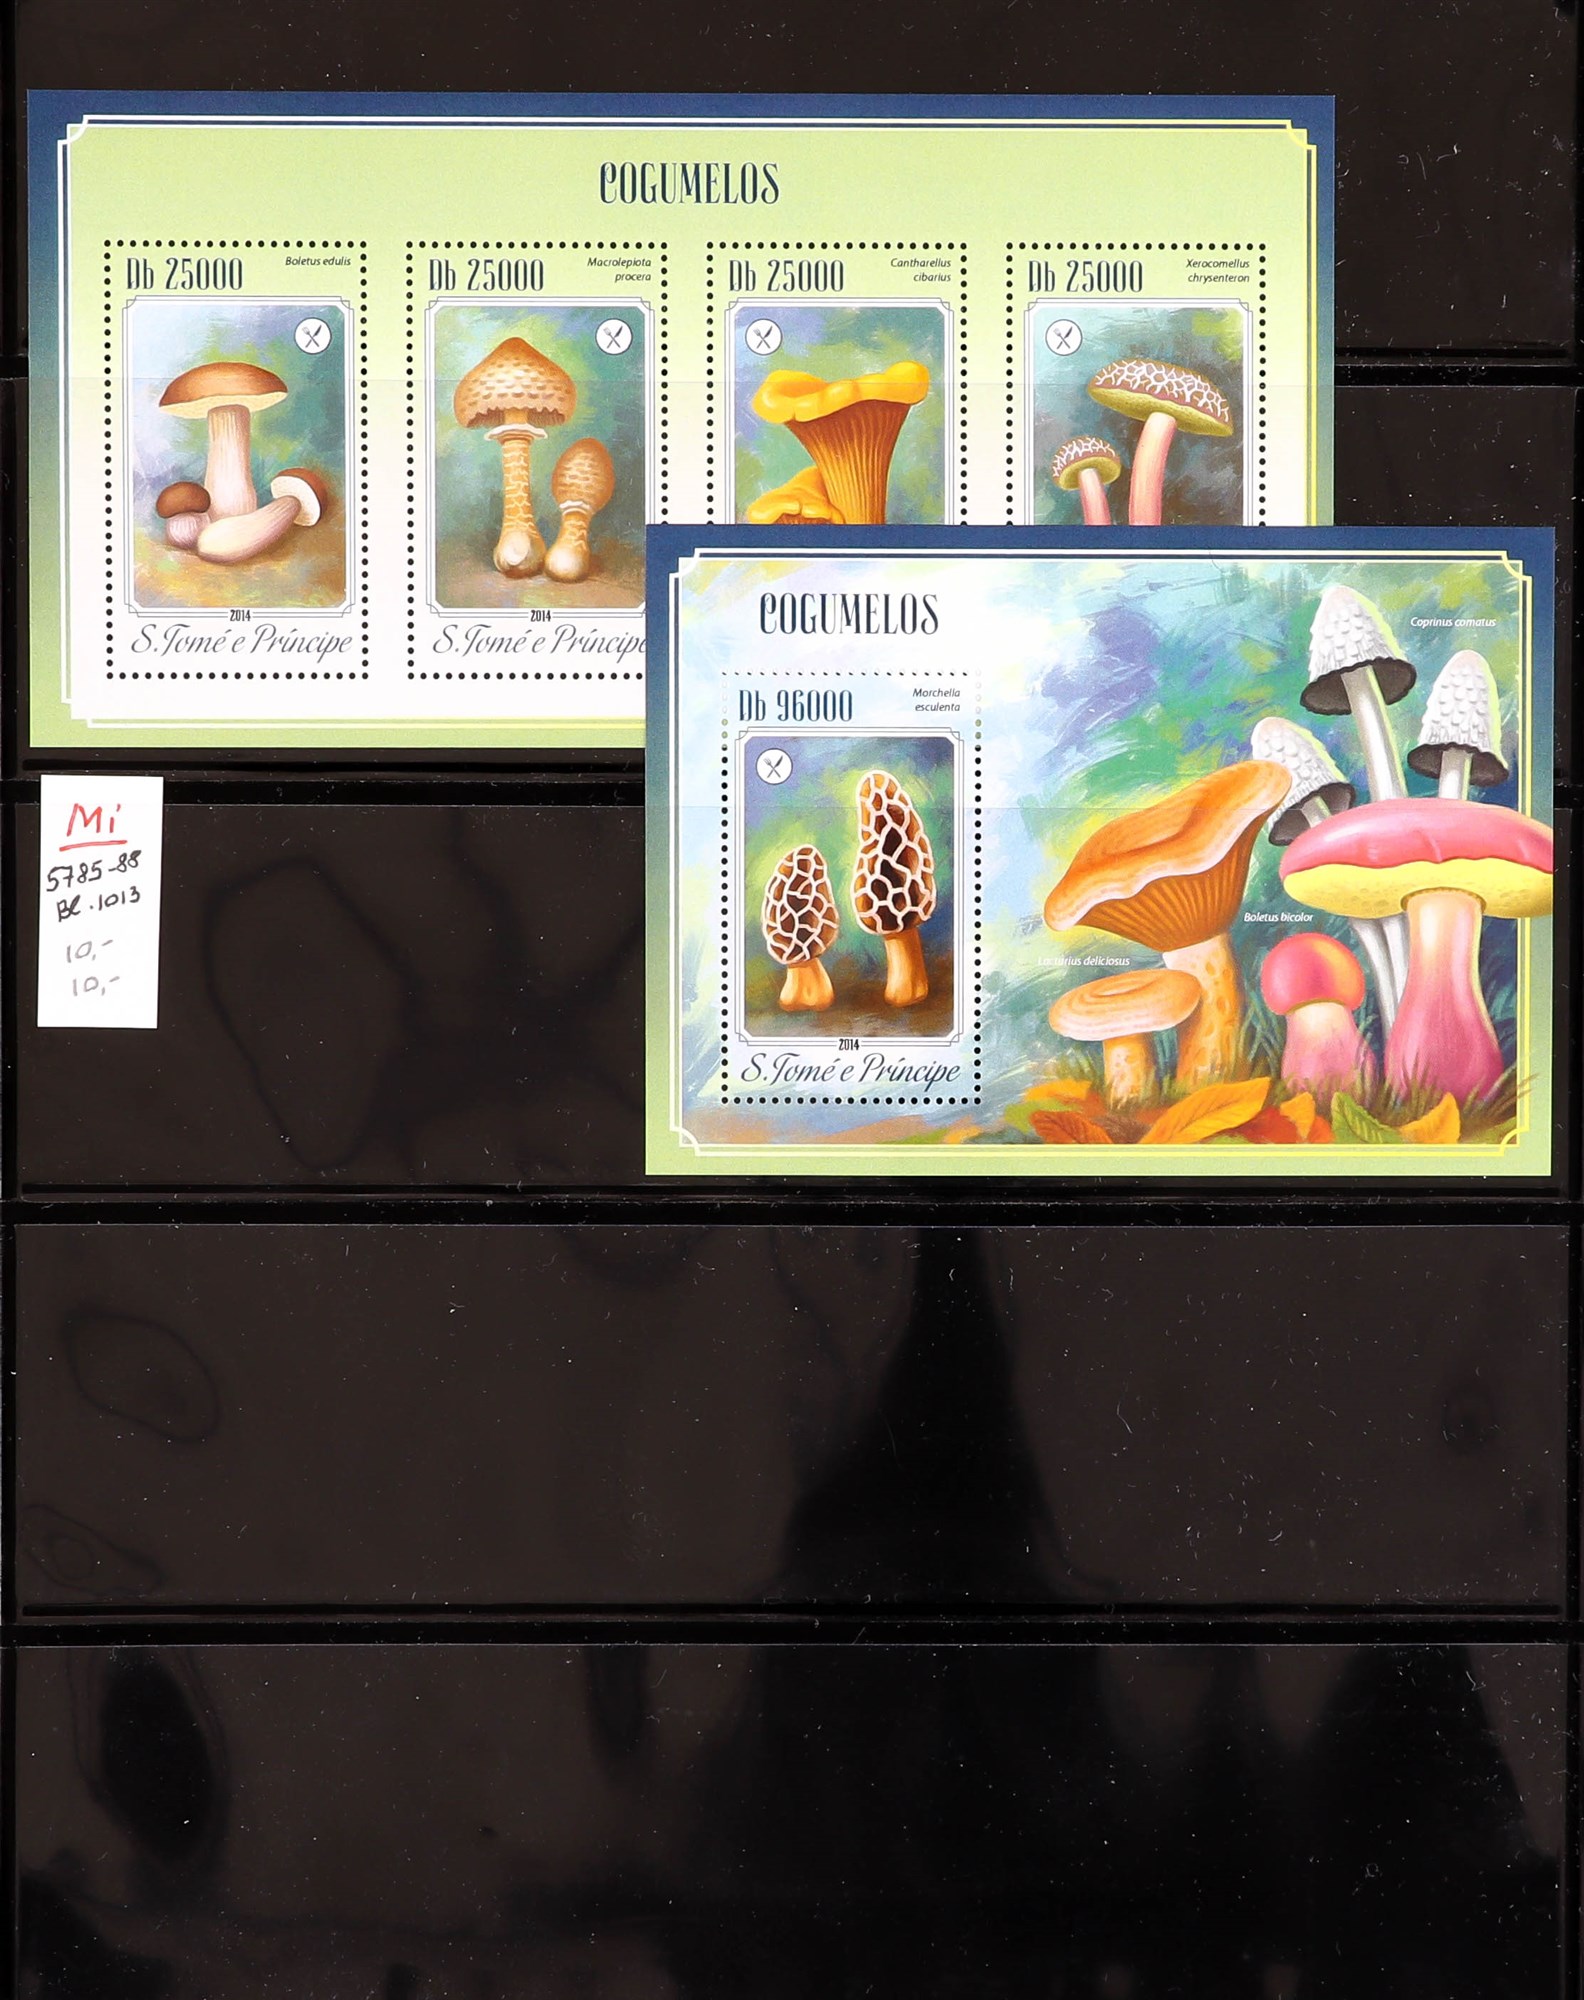 PORTUGUESE COLONIES FUNGI STAMPS OF ST THOMAS & PRINCE ISLANDS 1984 - 2014 never hinged mint - Image 12 of 30